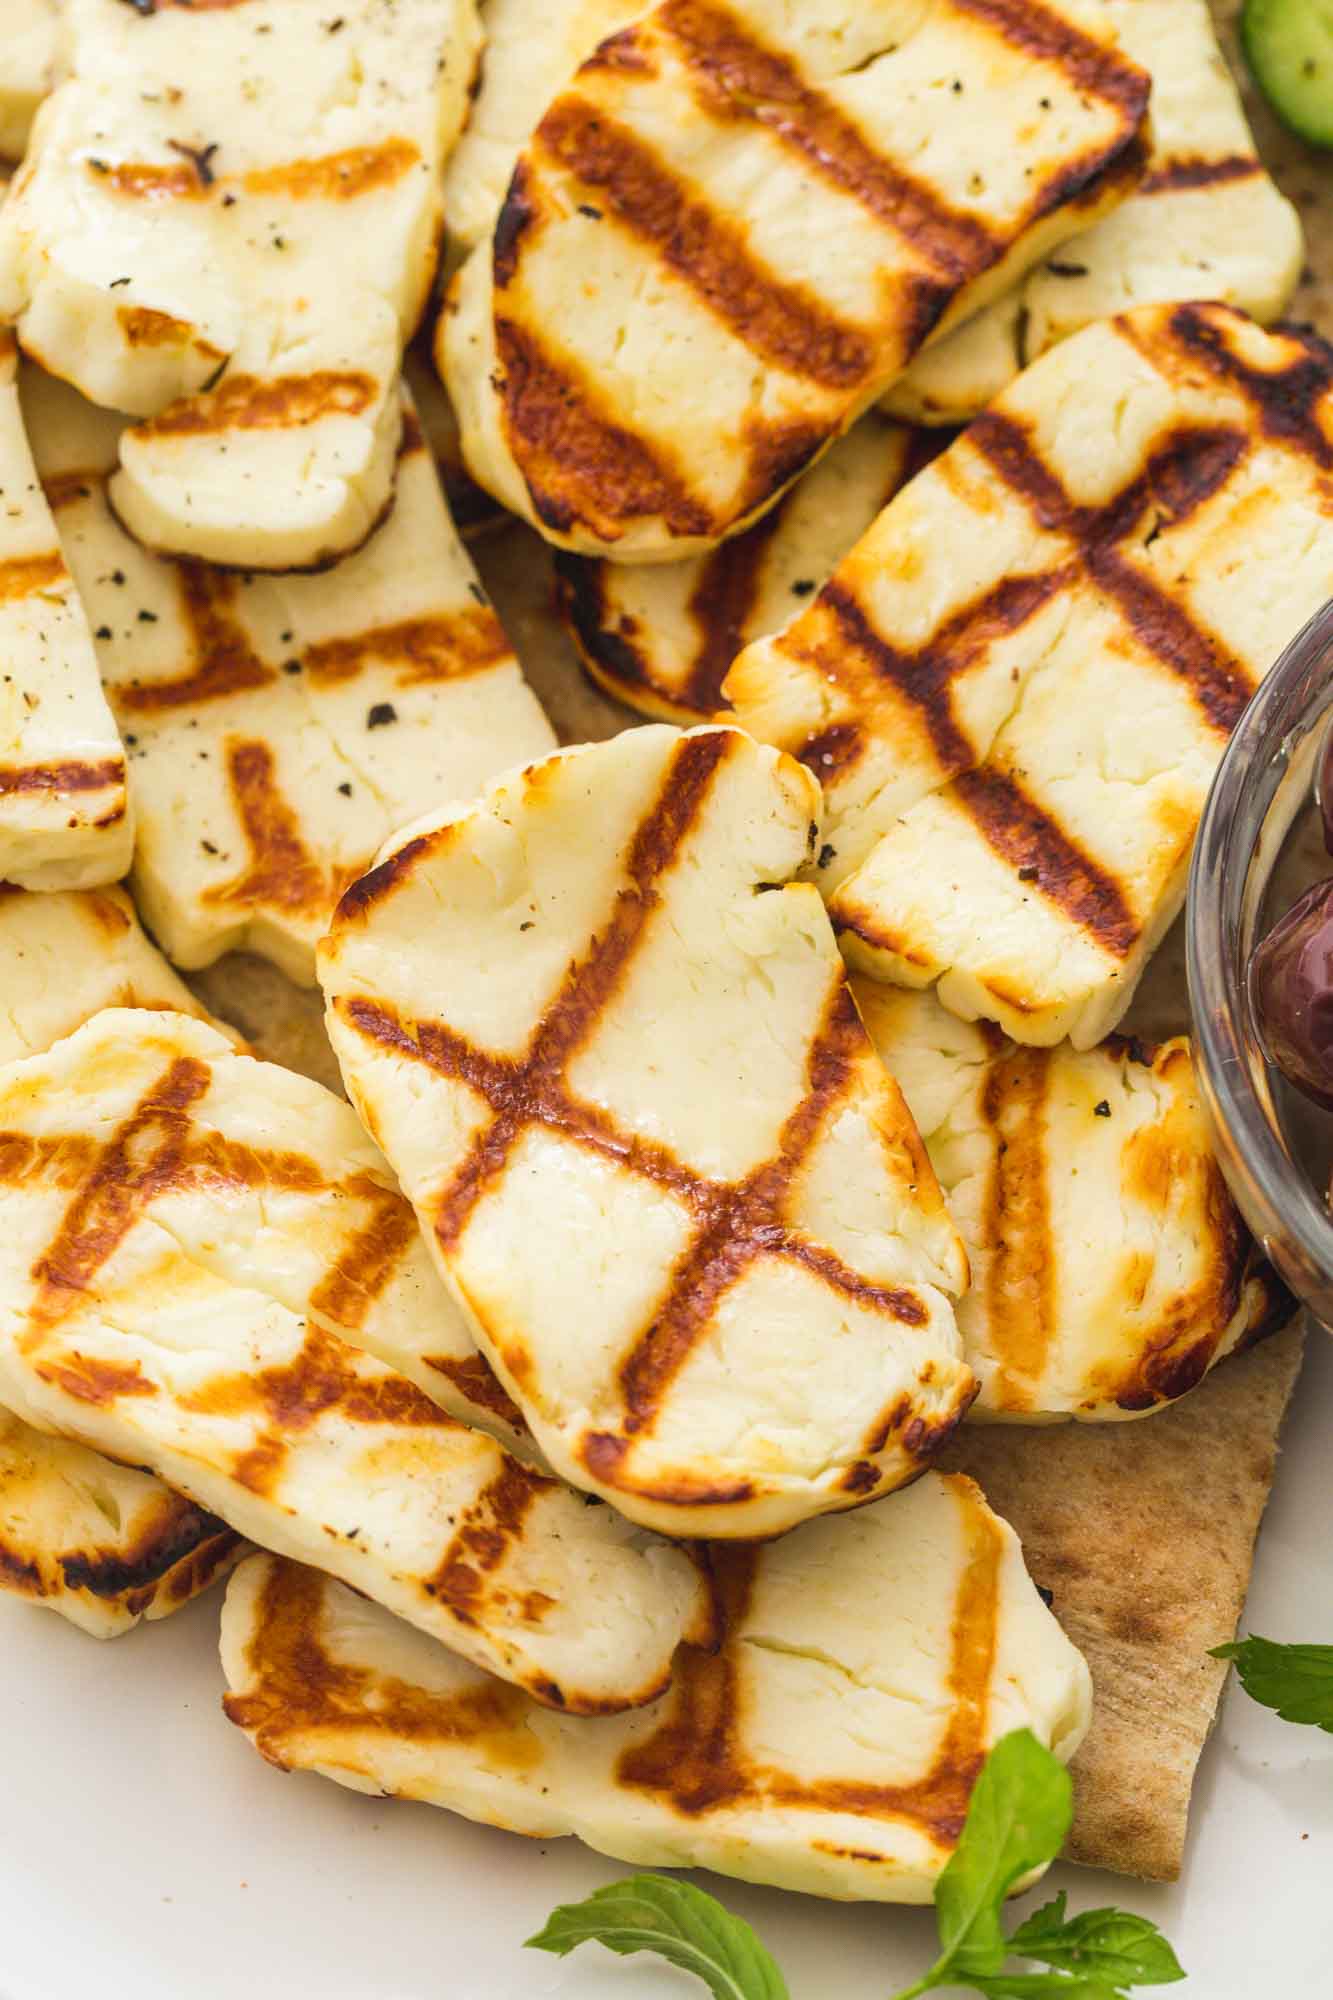 Close up of grilled halloumi slices on a platter